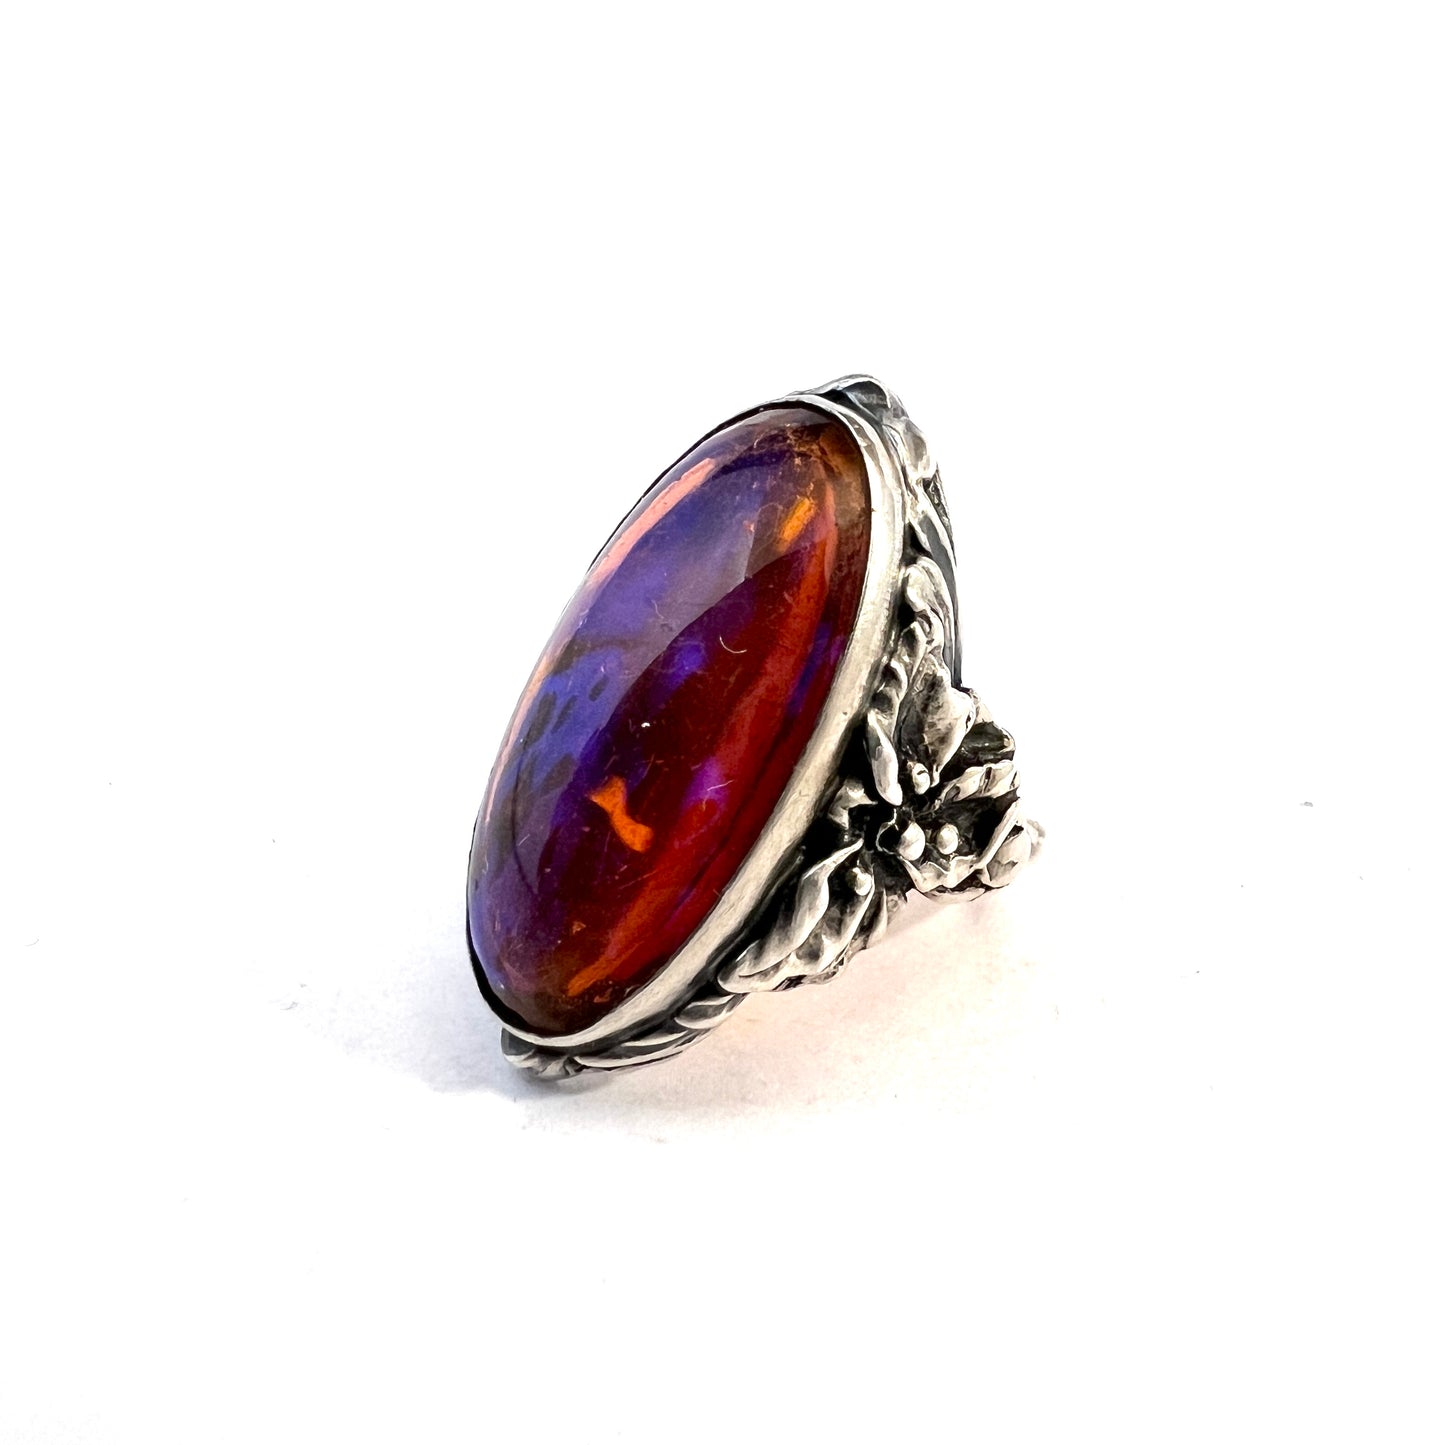 Antique Early 1900s. Sterling Silver Dragon's Breath Ring. Possibly France.